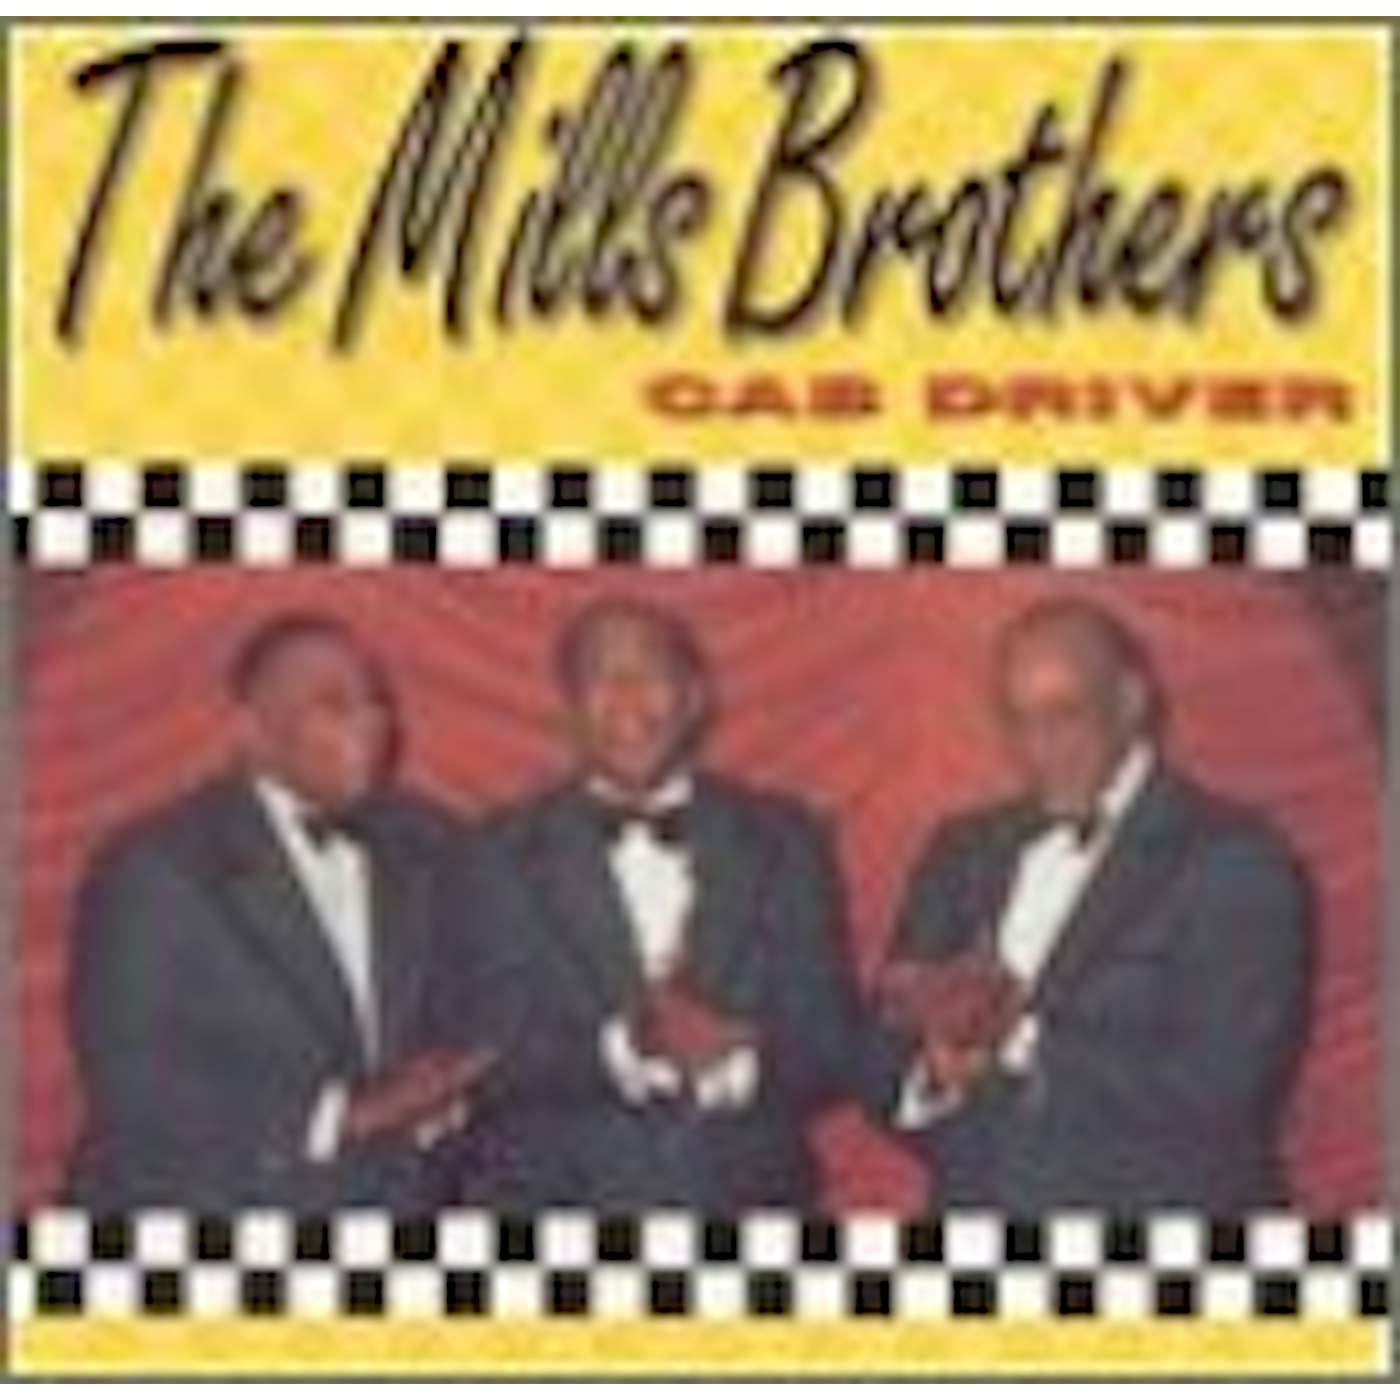 The Mills Brothers CAB DRIVER CD